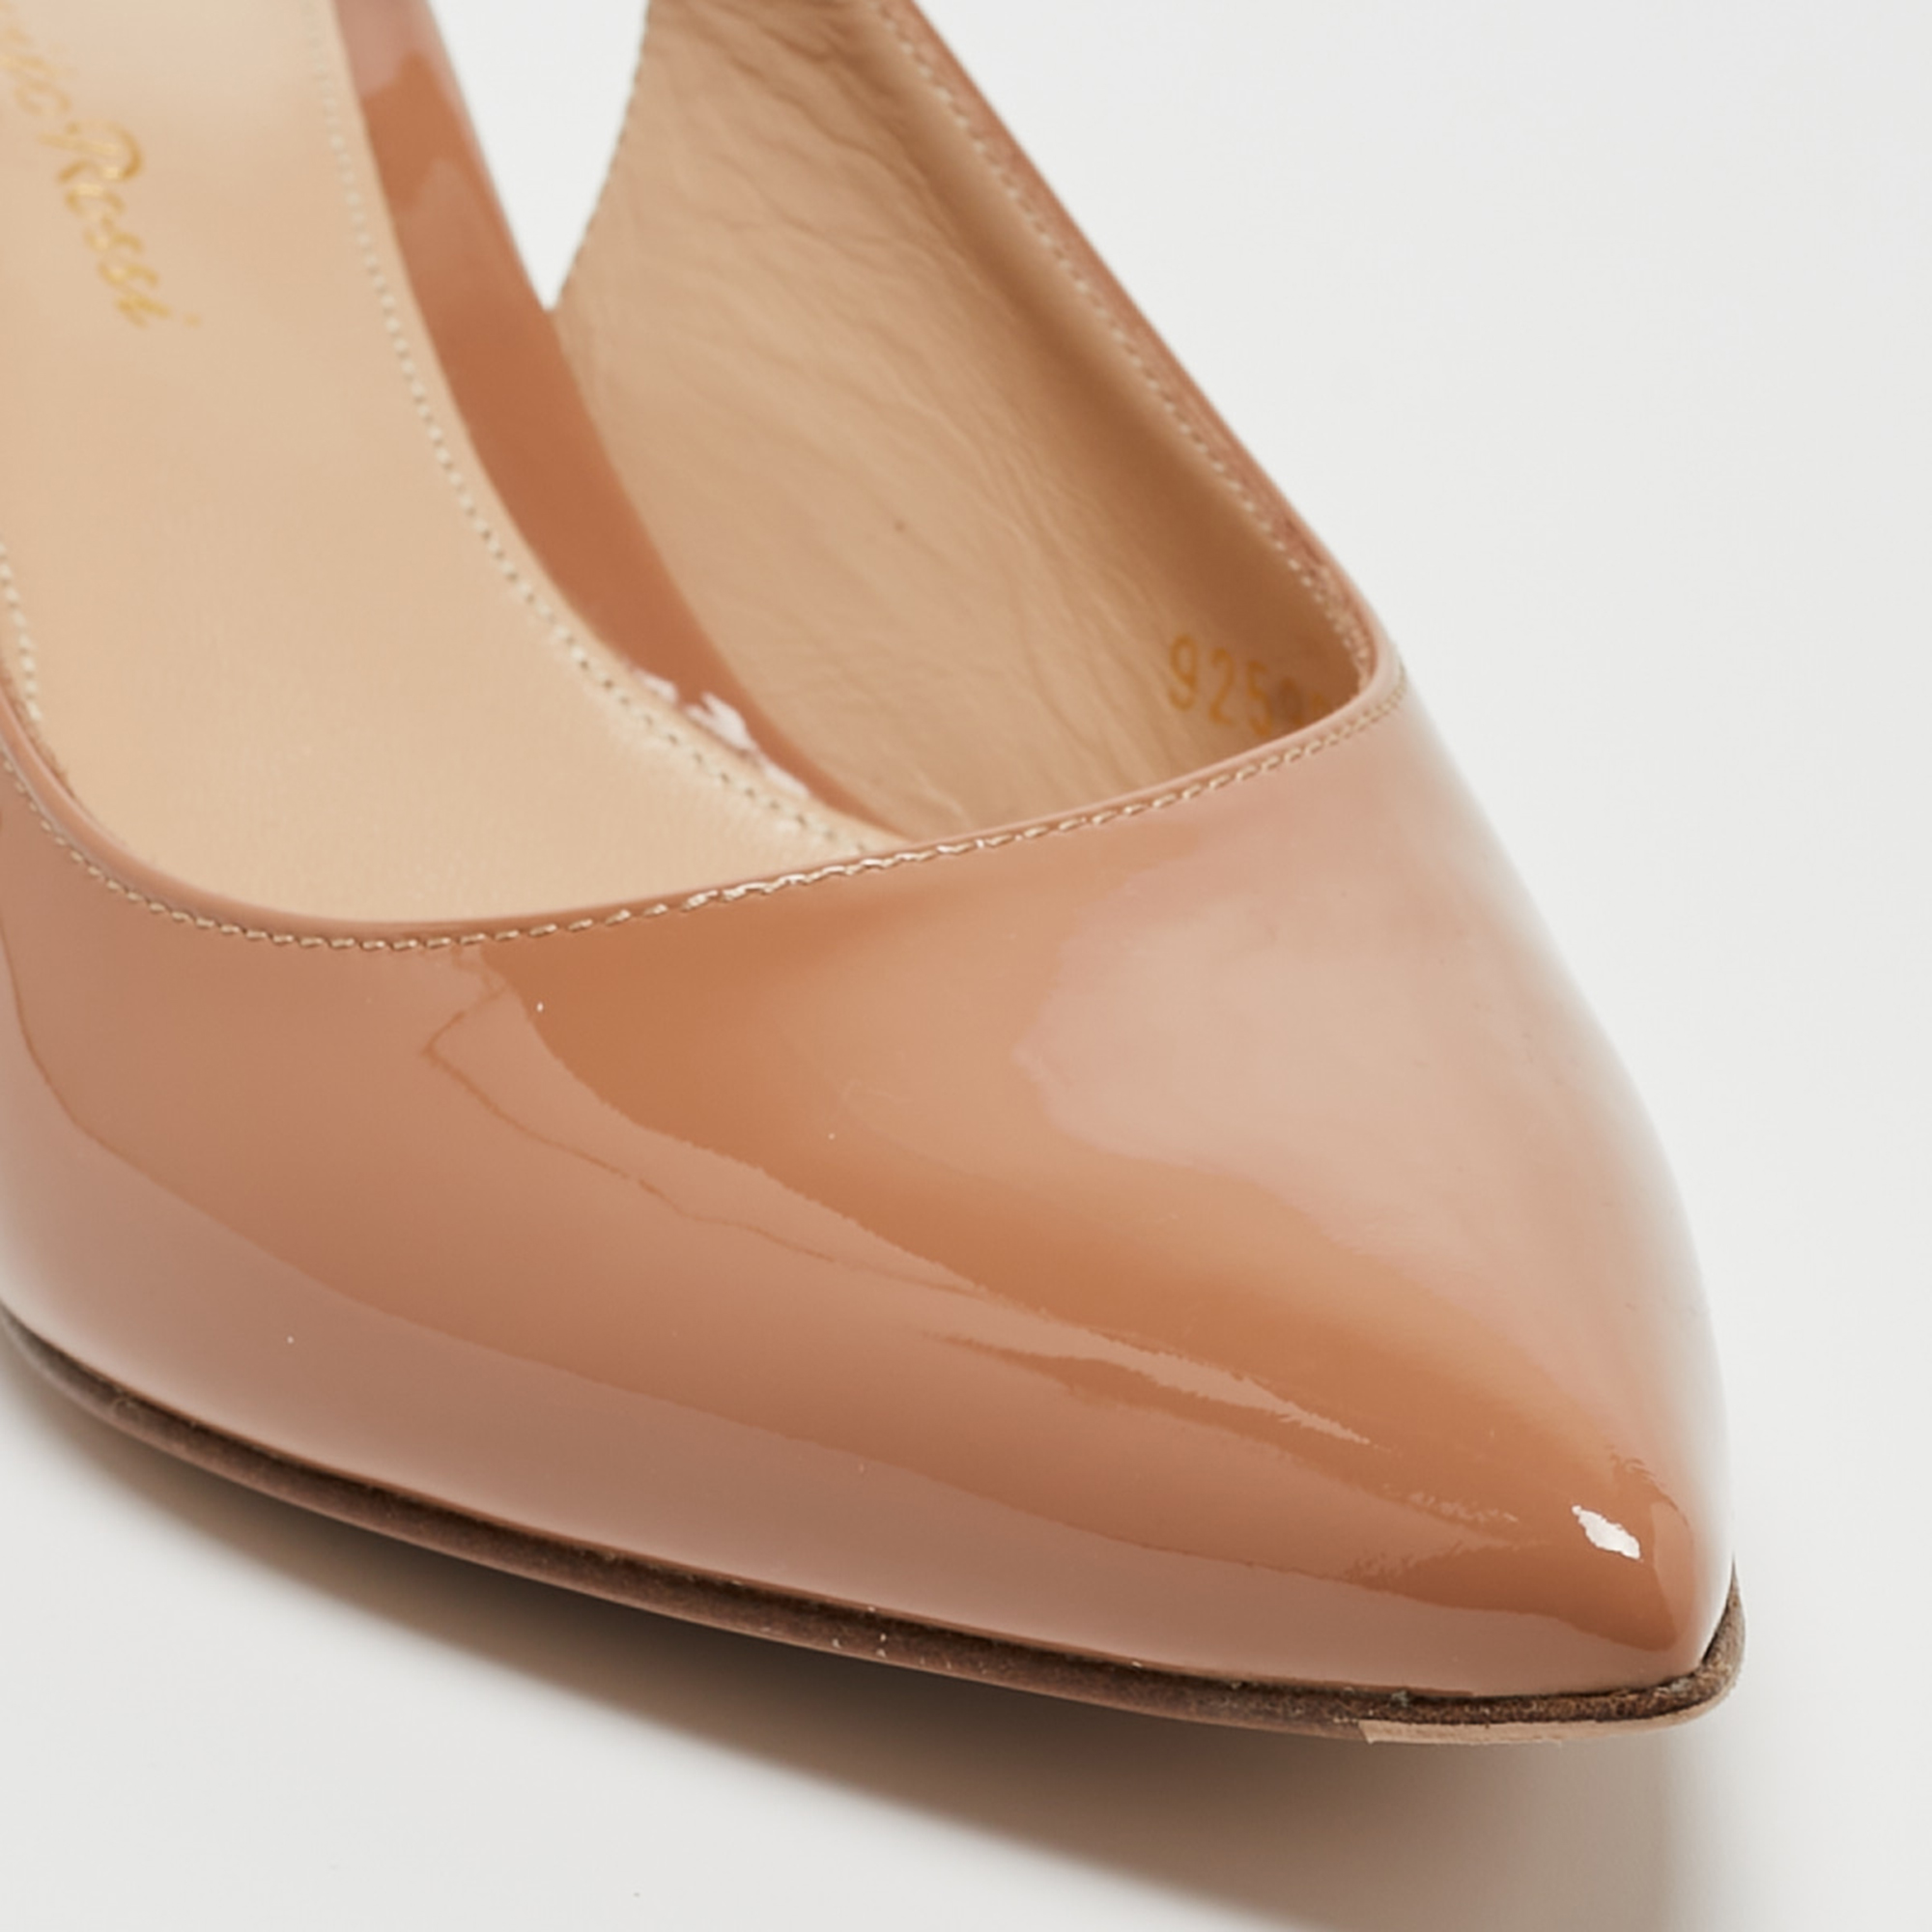 Gianvito Rossi Beige Patent Leather Amee Pumps Size 37